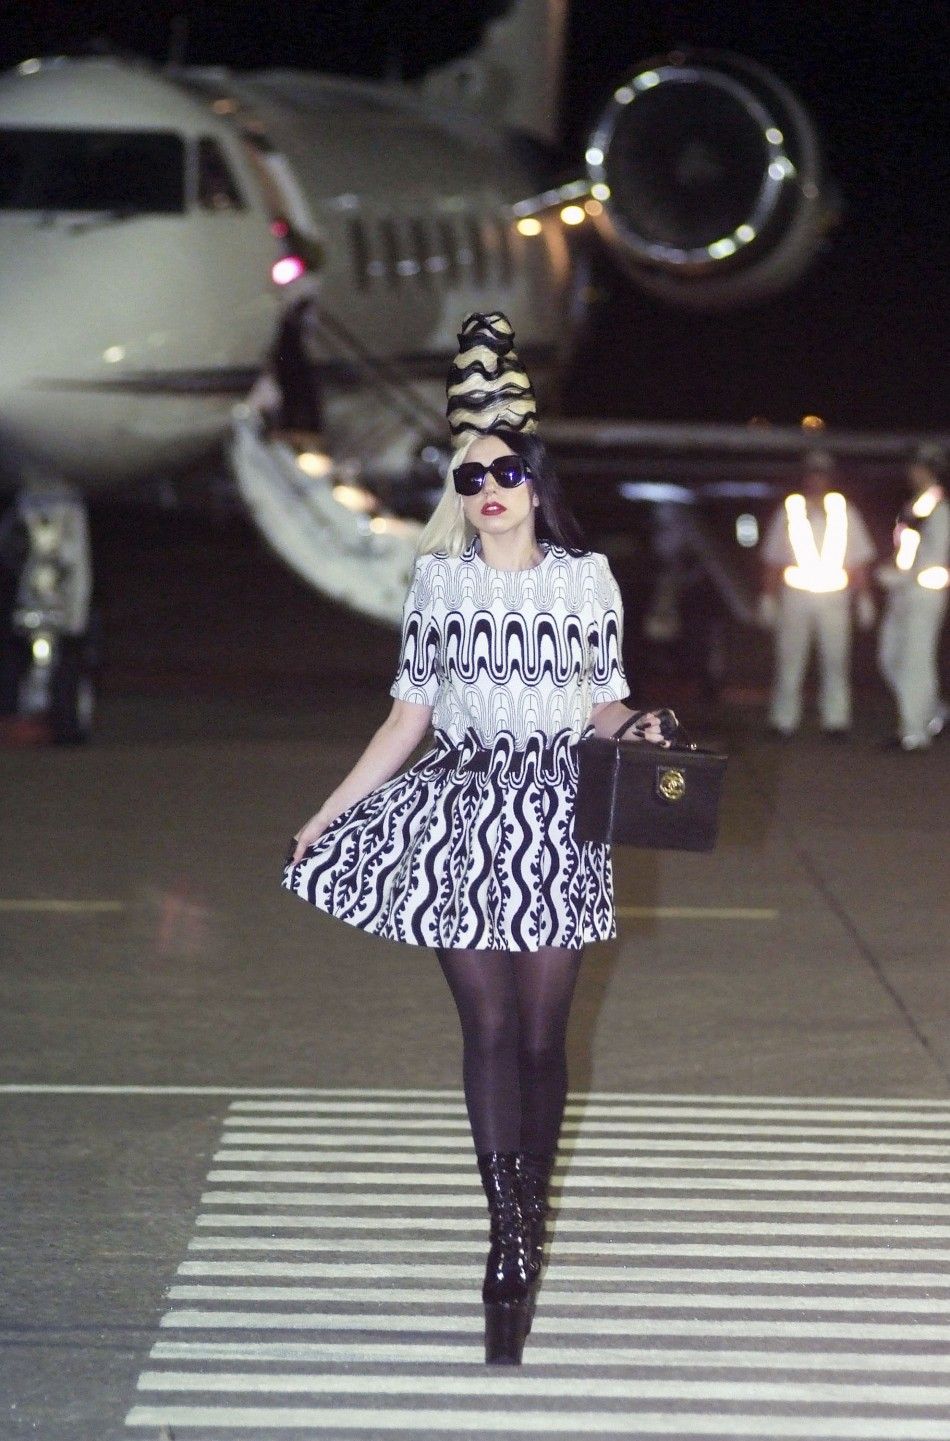 Lady Gaga at a fashion contest for promotion of her album